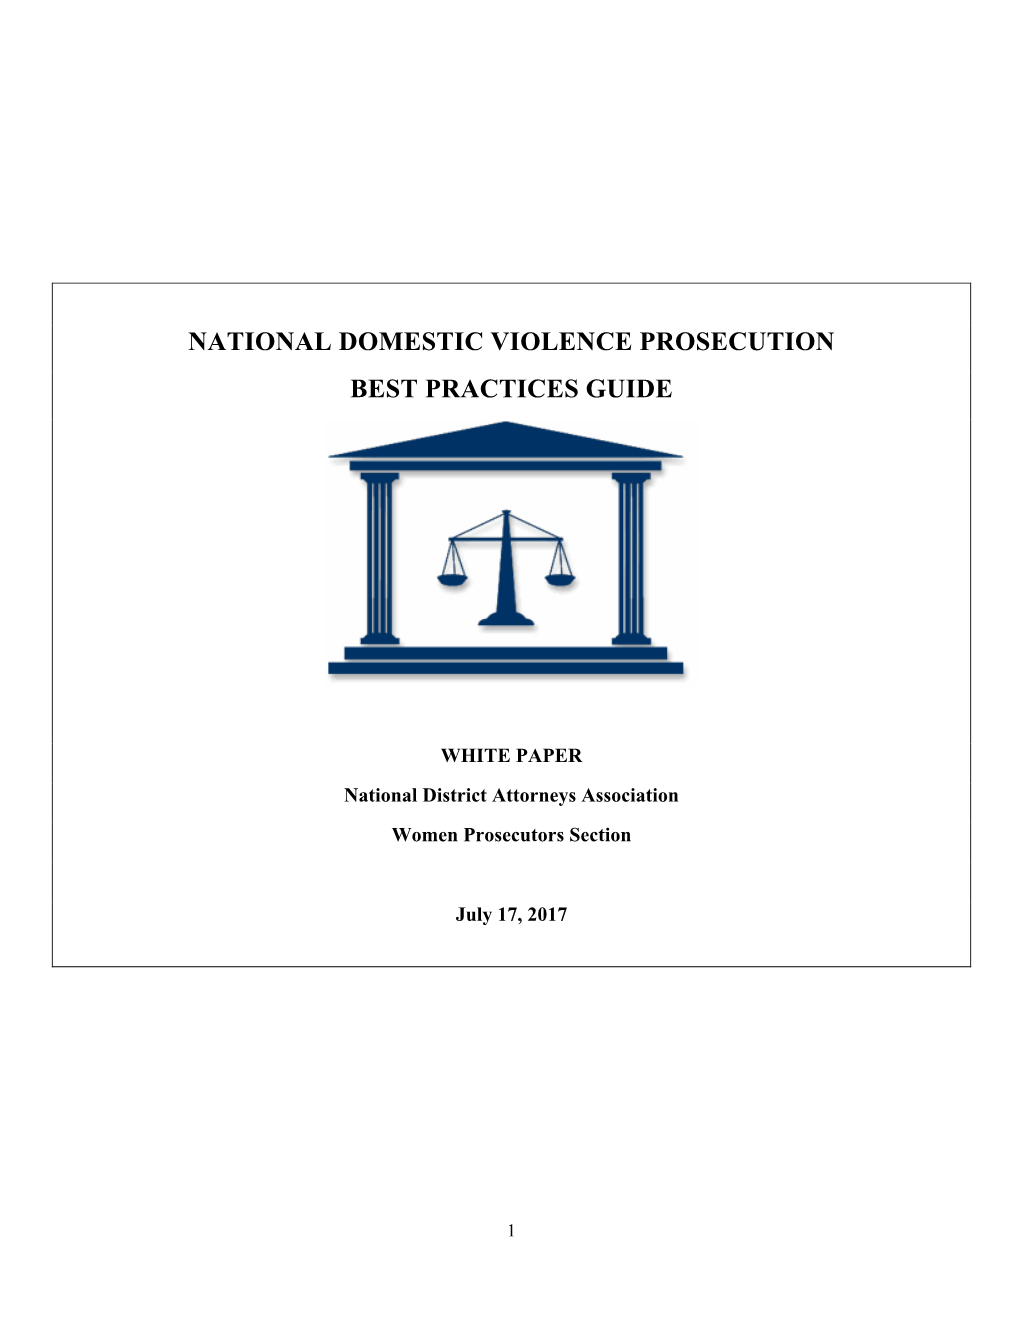 National Domestic Violence Prosecution Best Practices Guide